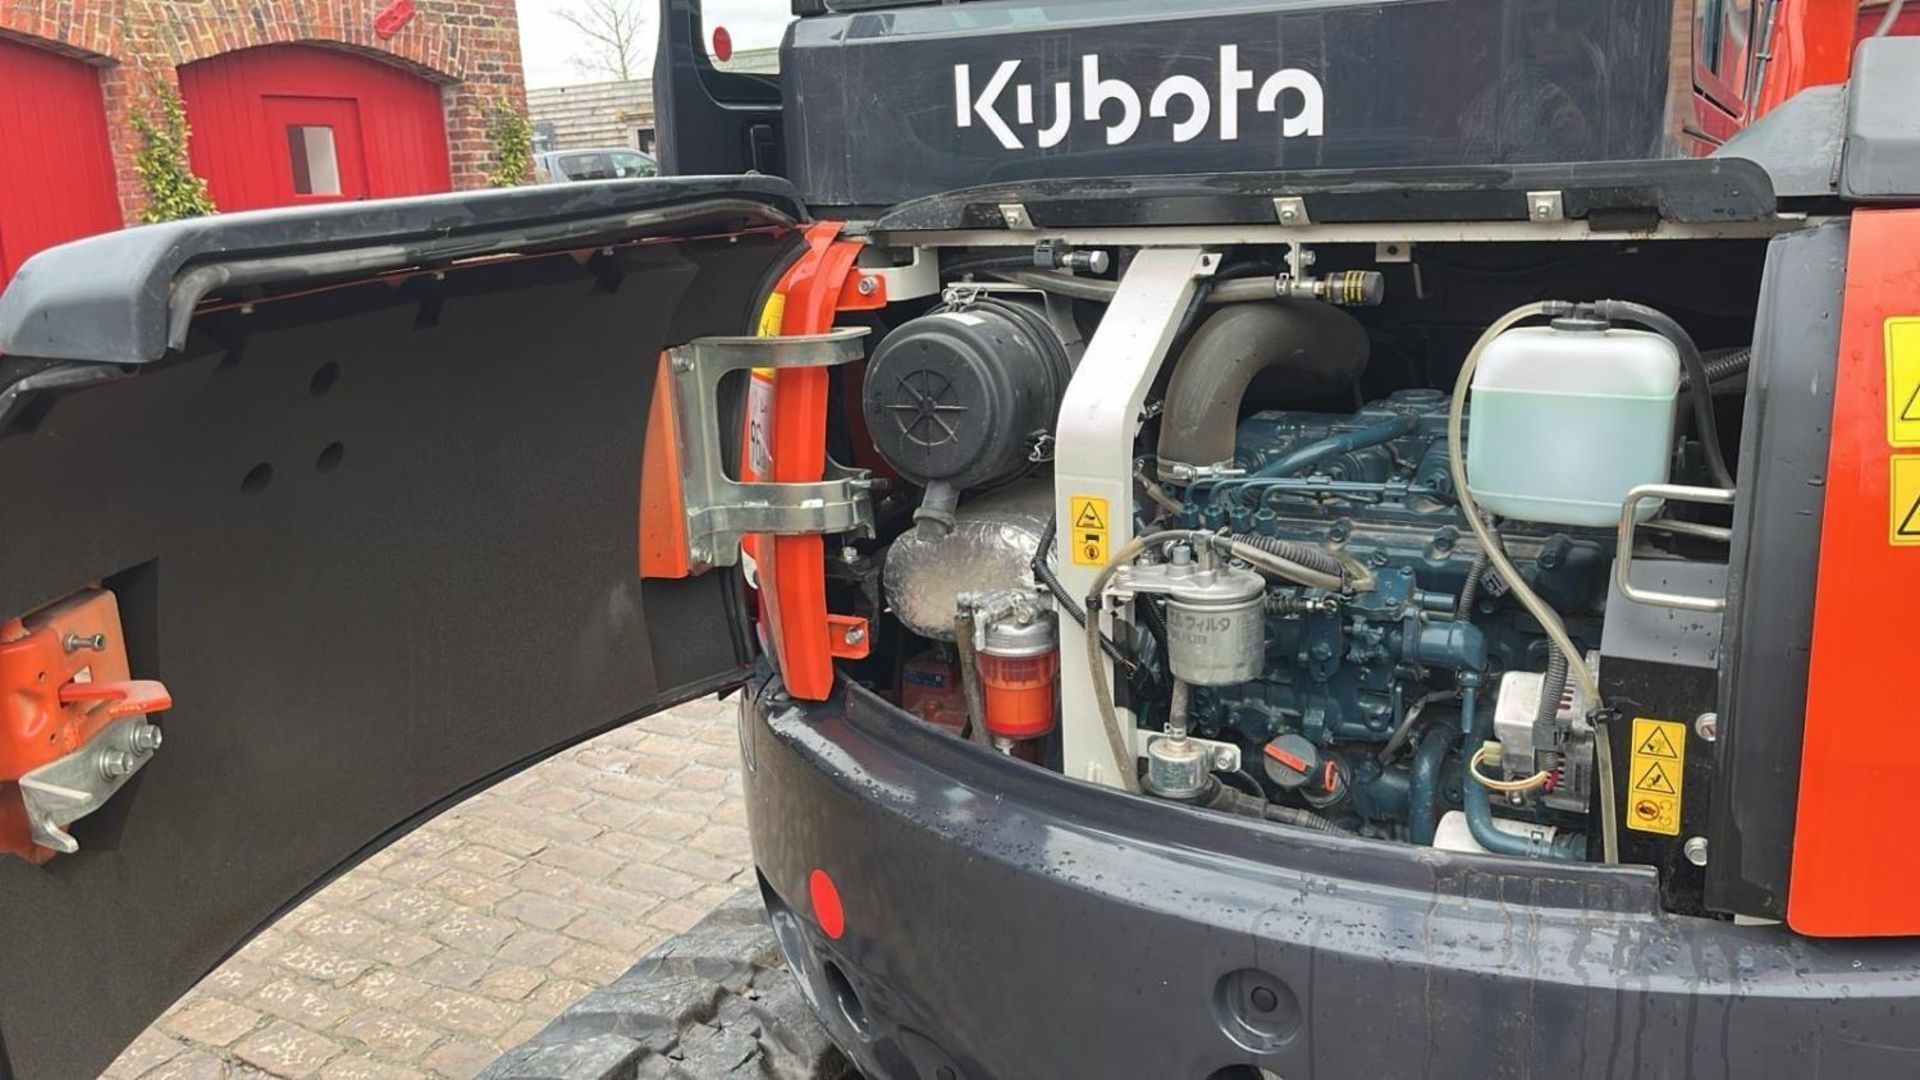 2019 KUBOTA U48-4 COMPACT EXCAVATOR 552 HOURS WITH HYDRAULIC QUICK HITCH TO BE SOLD WITH 4 BUCKETS - Image 19 of 24